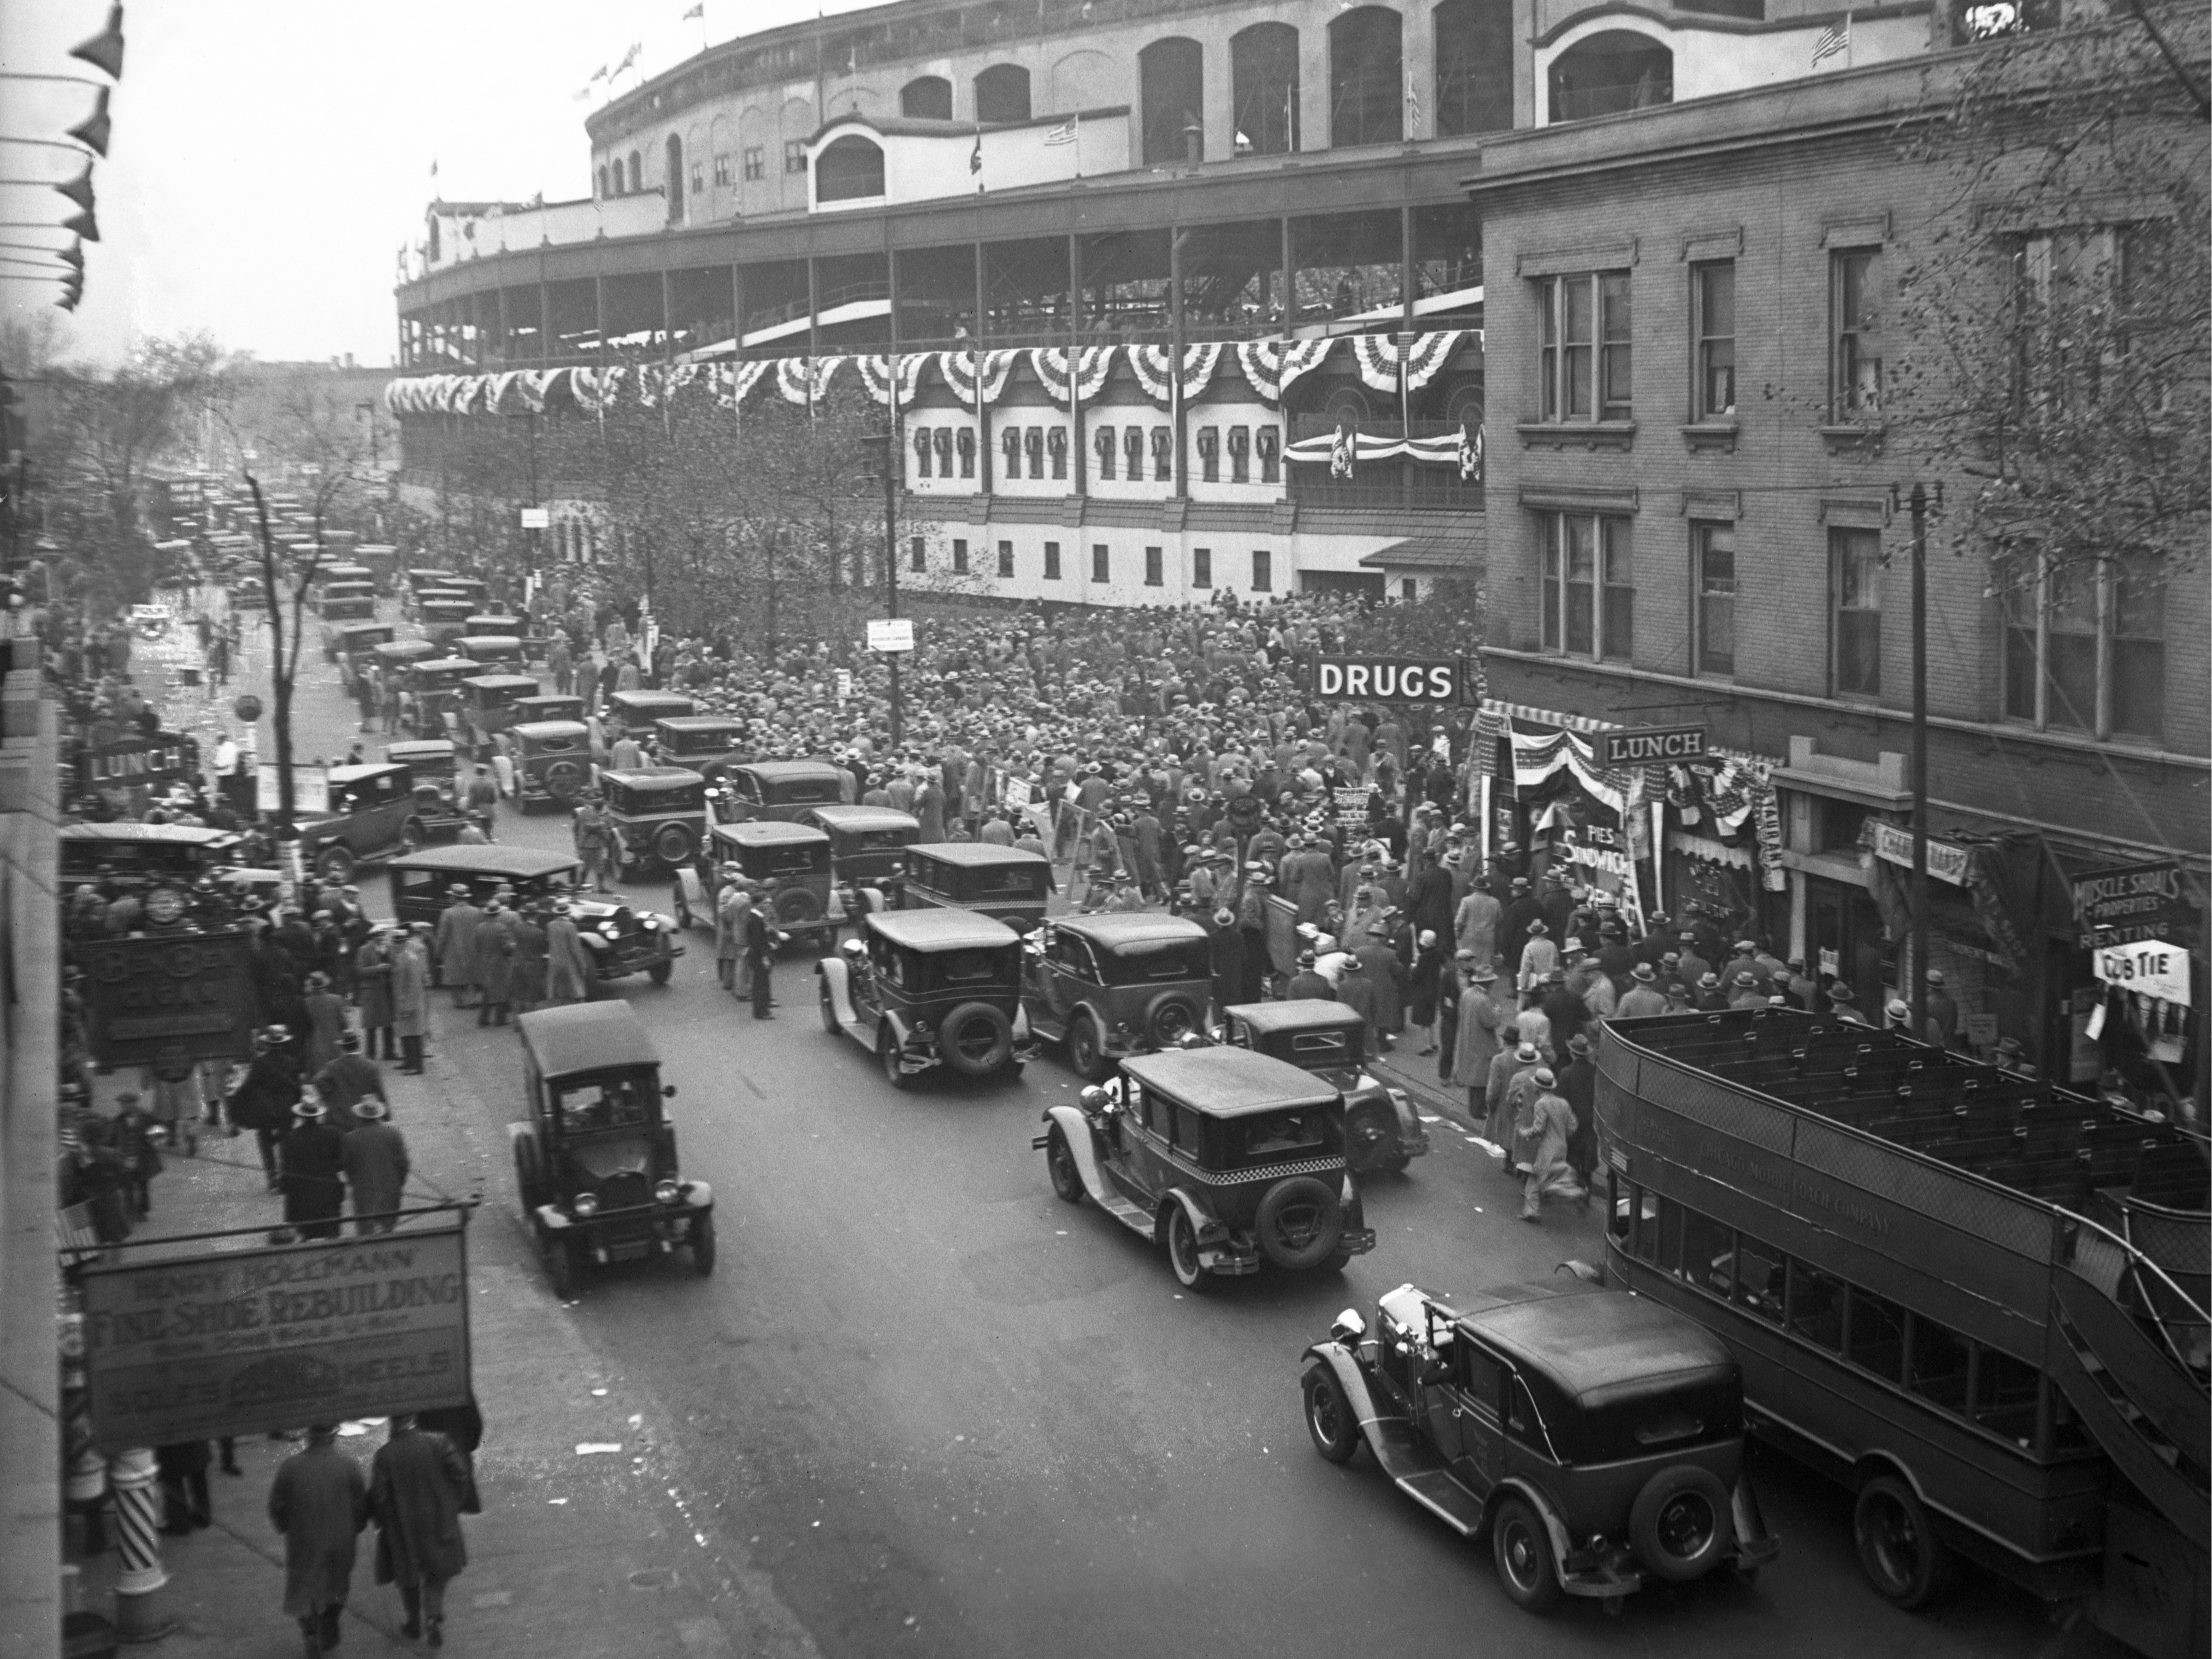 Energized by the first World Series held at Chicago's Wrigley Field, baseball fans crowd the corner of Addison and Sheffield as they await the matchup between the hometown Cubs and the Philadelphia Athletics, Oct. 1929.